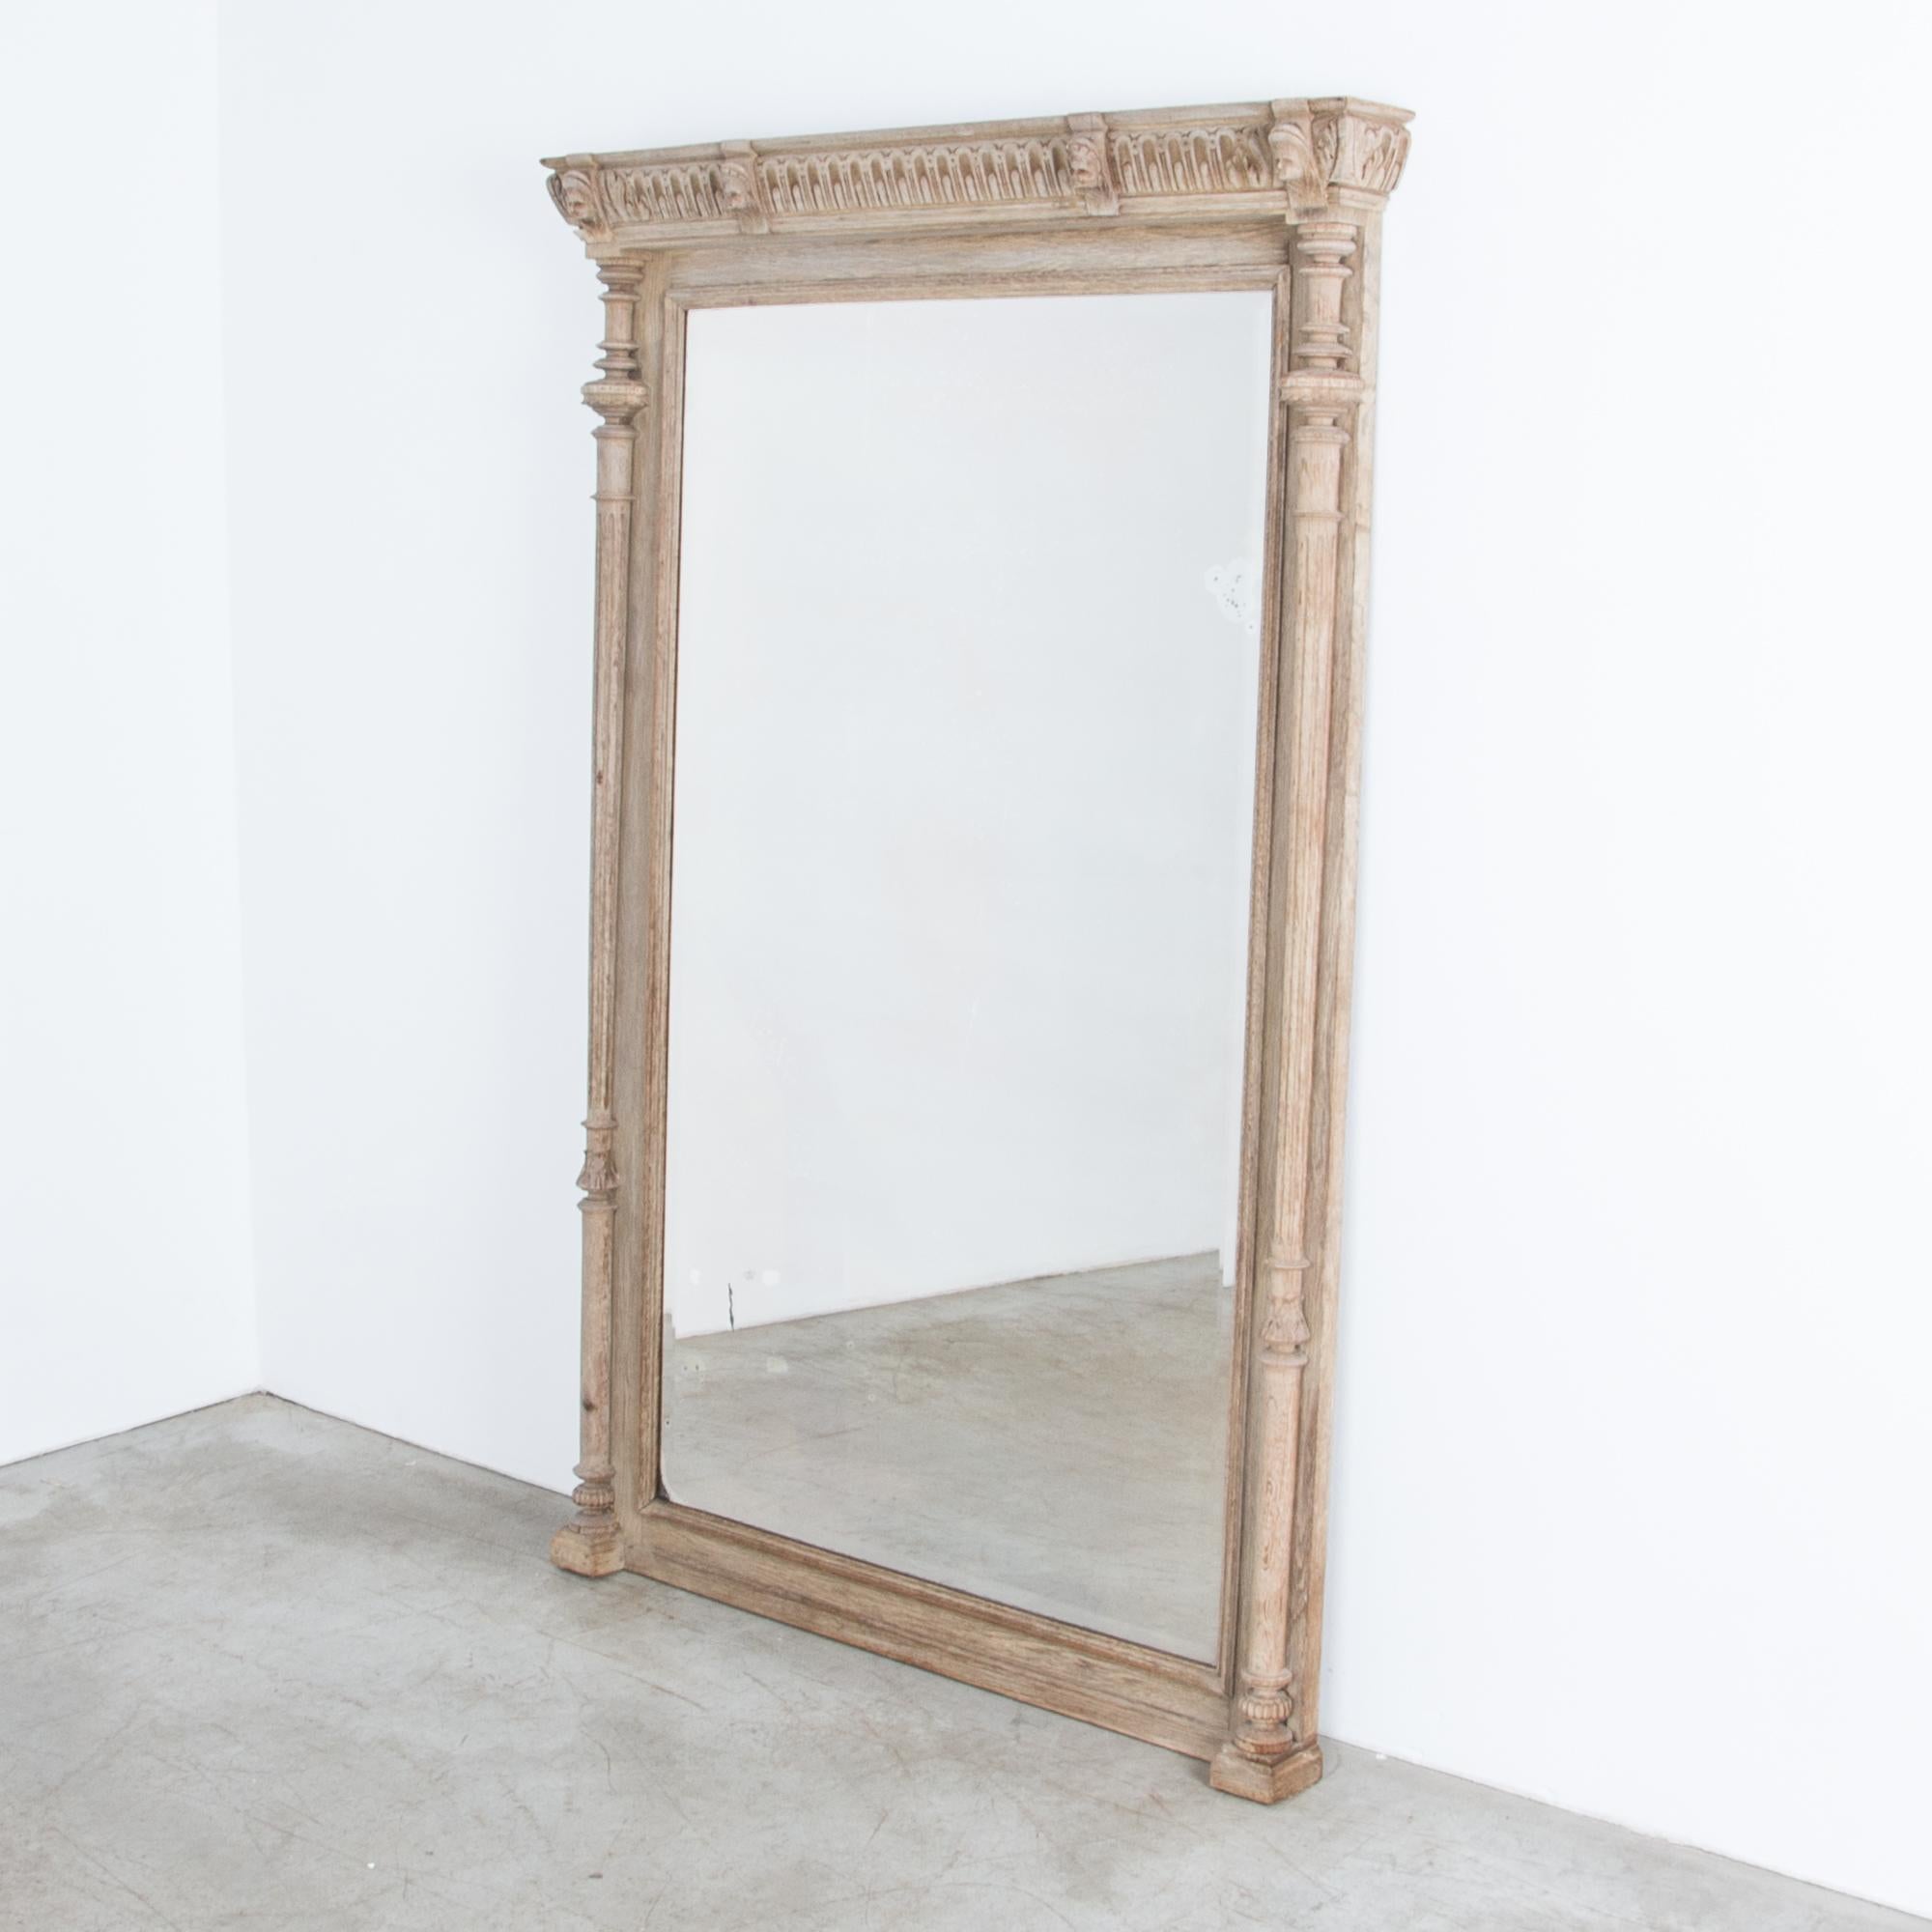 French Provincial Antique Floor Mirror with Carved Wooden Frame